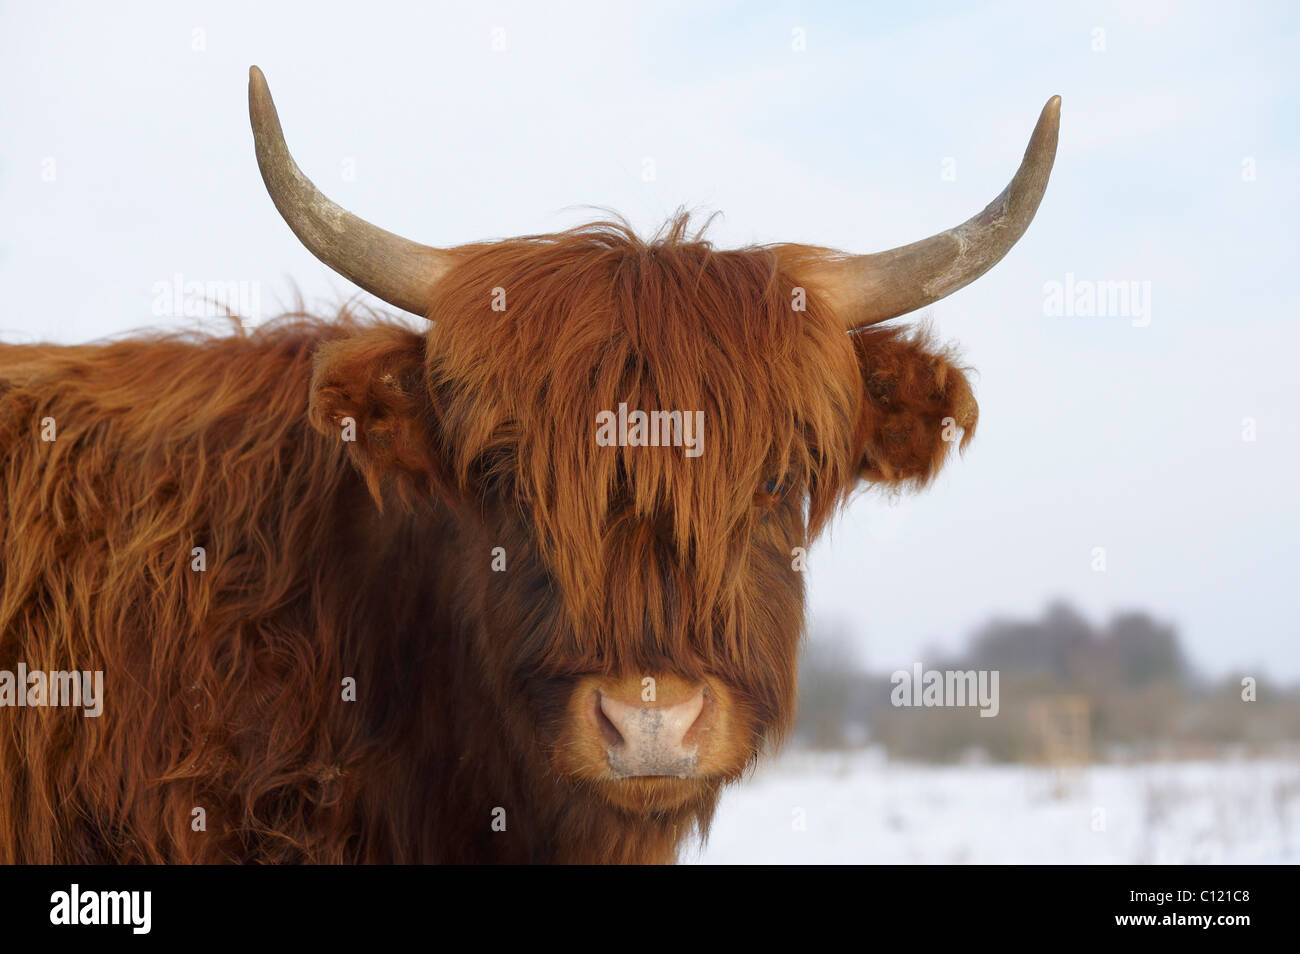 Heck cattle on a pasture in the snow, near Berlin, Germany, Europe Stock Photo